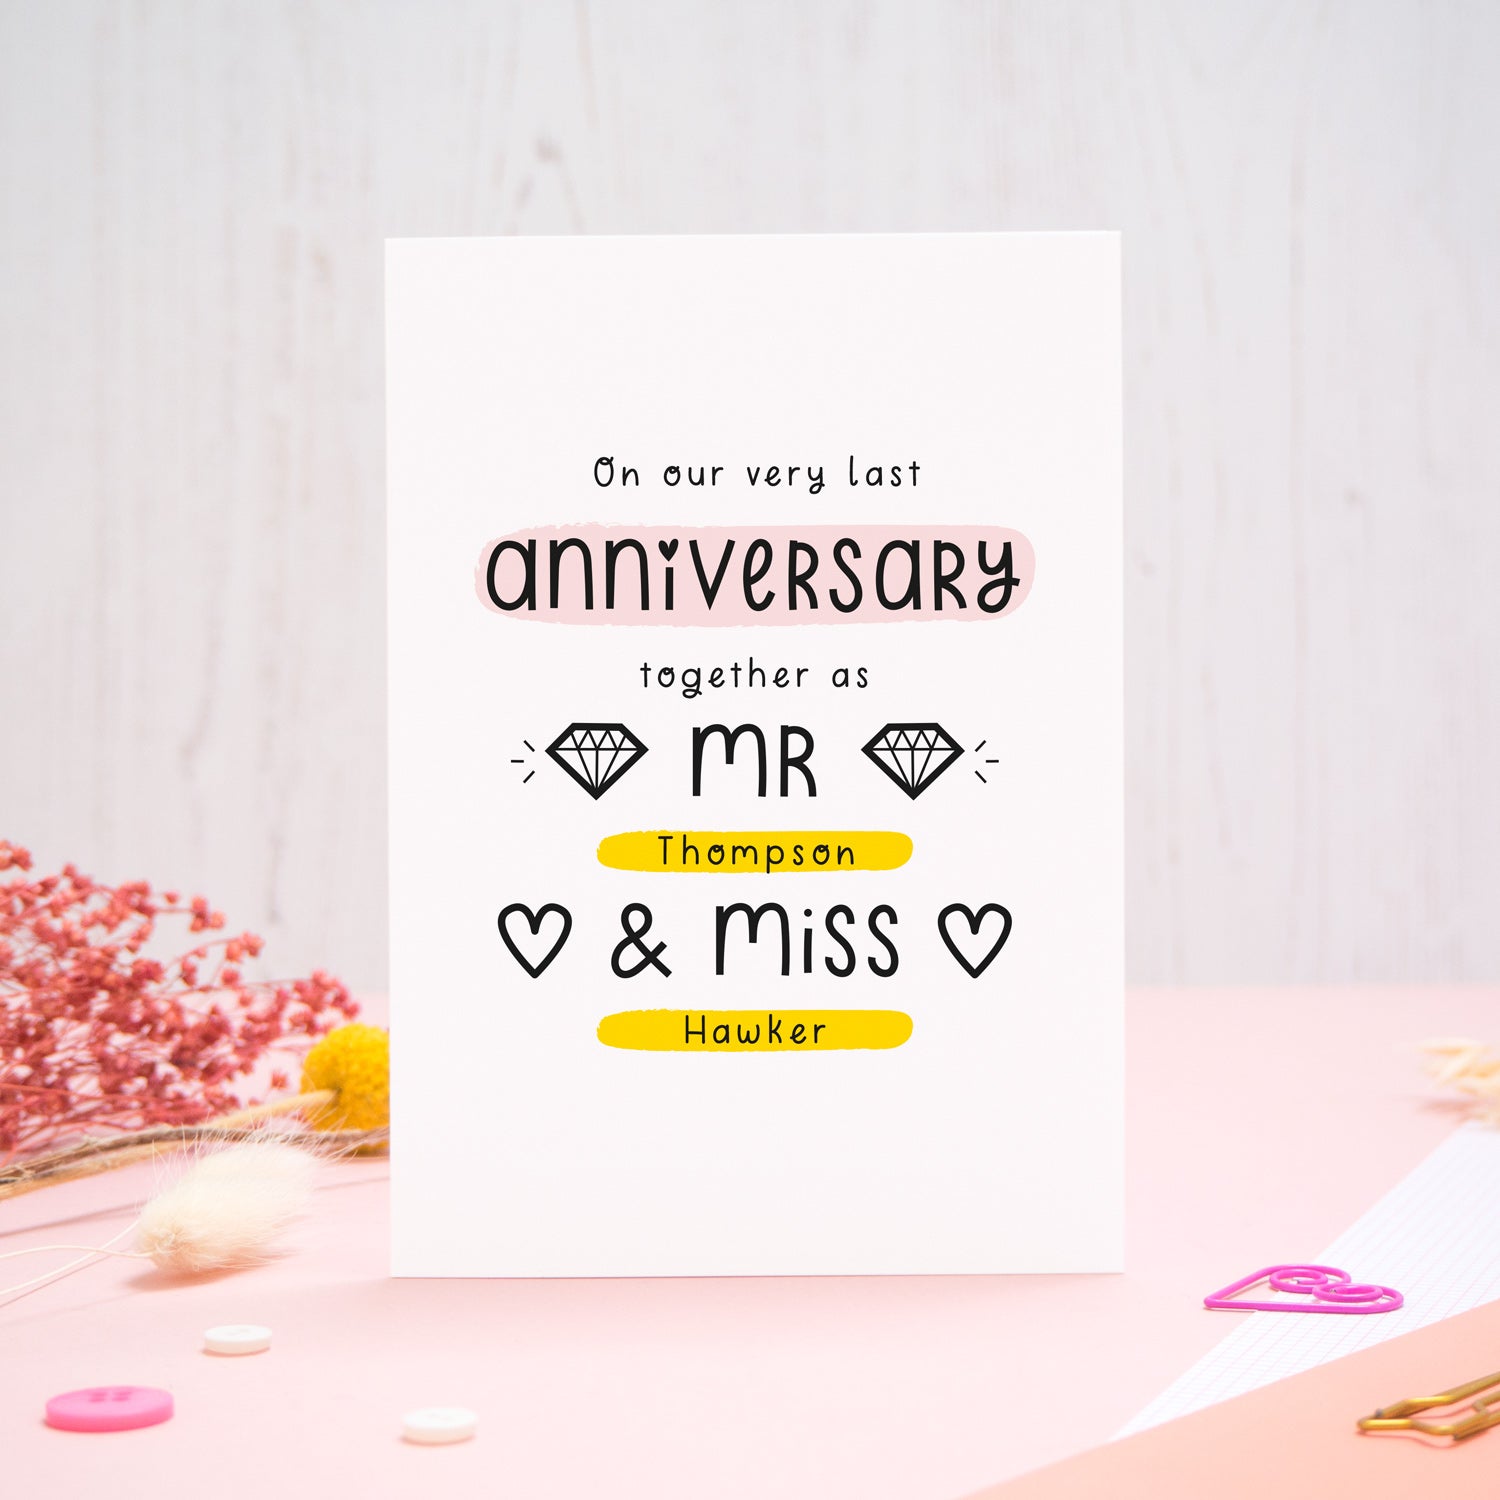 A personalised last anniversary or Valentine’s card photographed on a pink and white background with floral props, paper clips, and buttons. This image shows the last anniversary option with the Mr & Miss wording. The text is black and there are pops of yellow and pink behind key words.